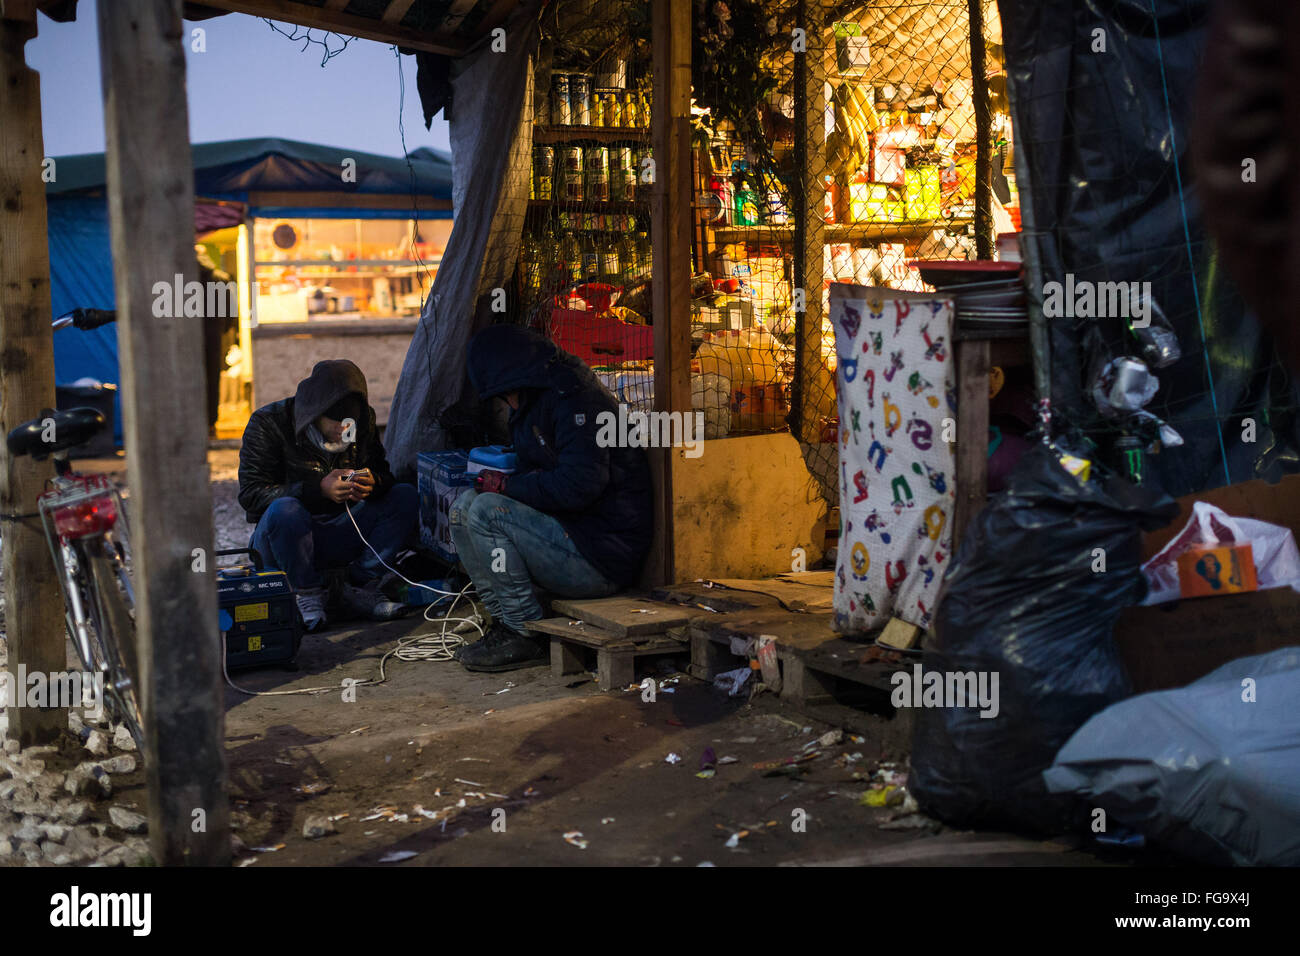 in the Jungle Refuee Camp, Calais, France. Stock Photo